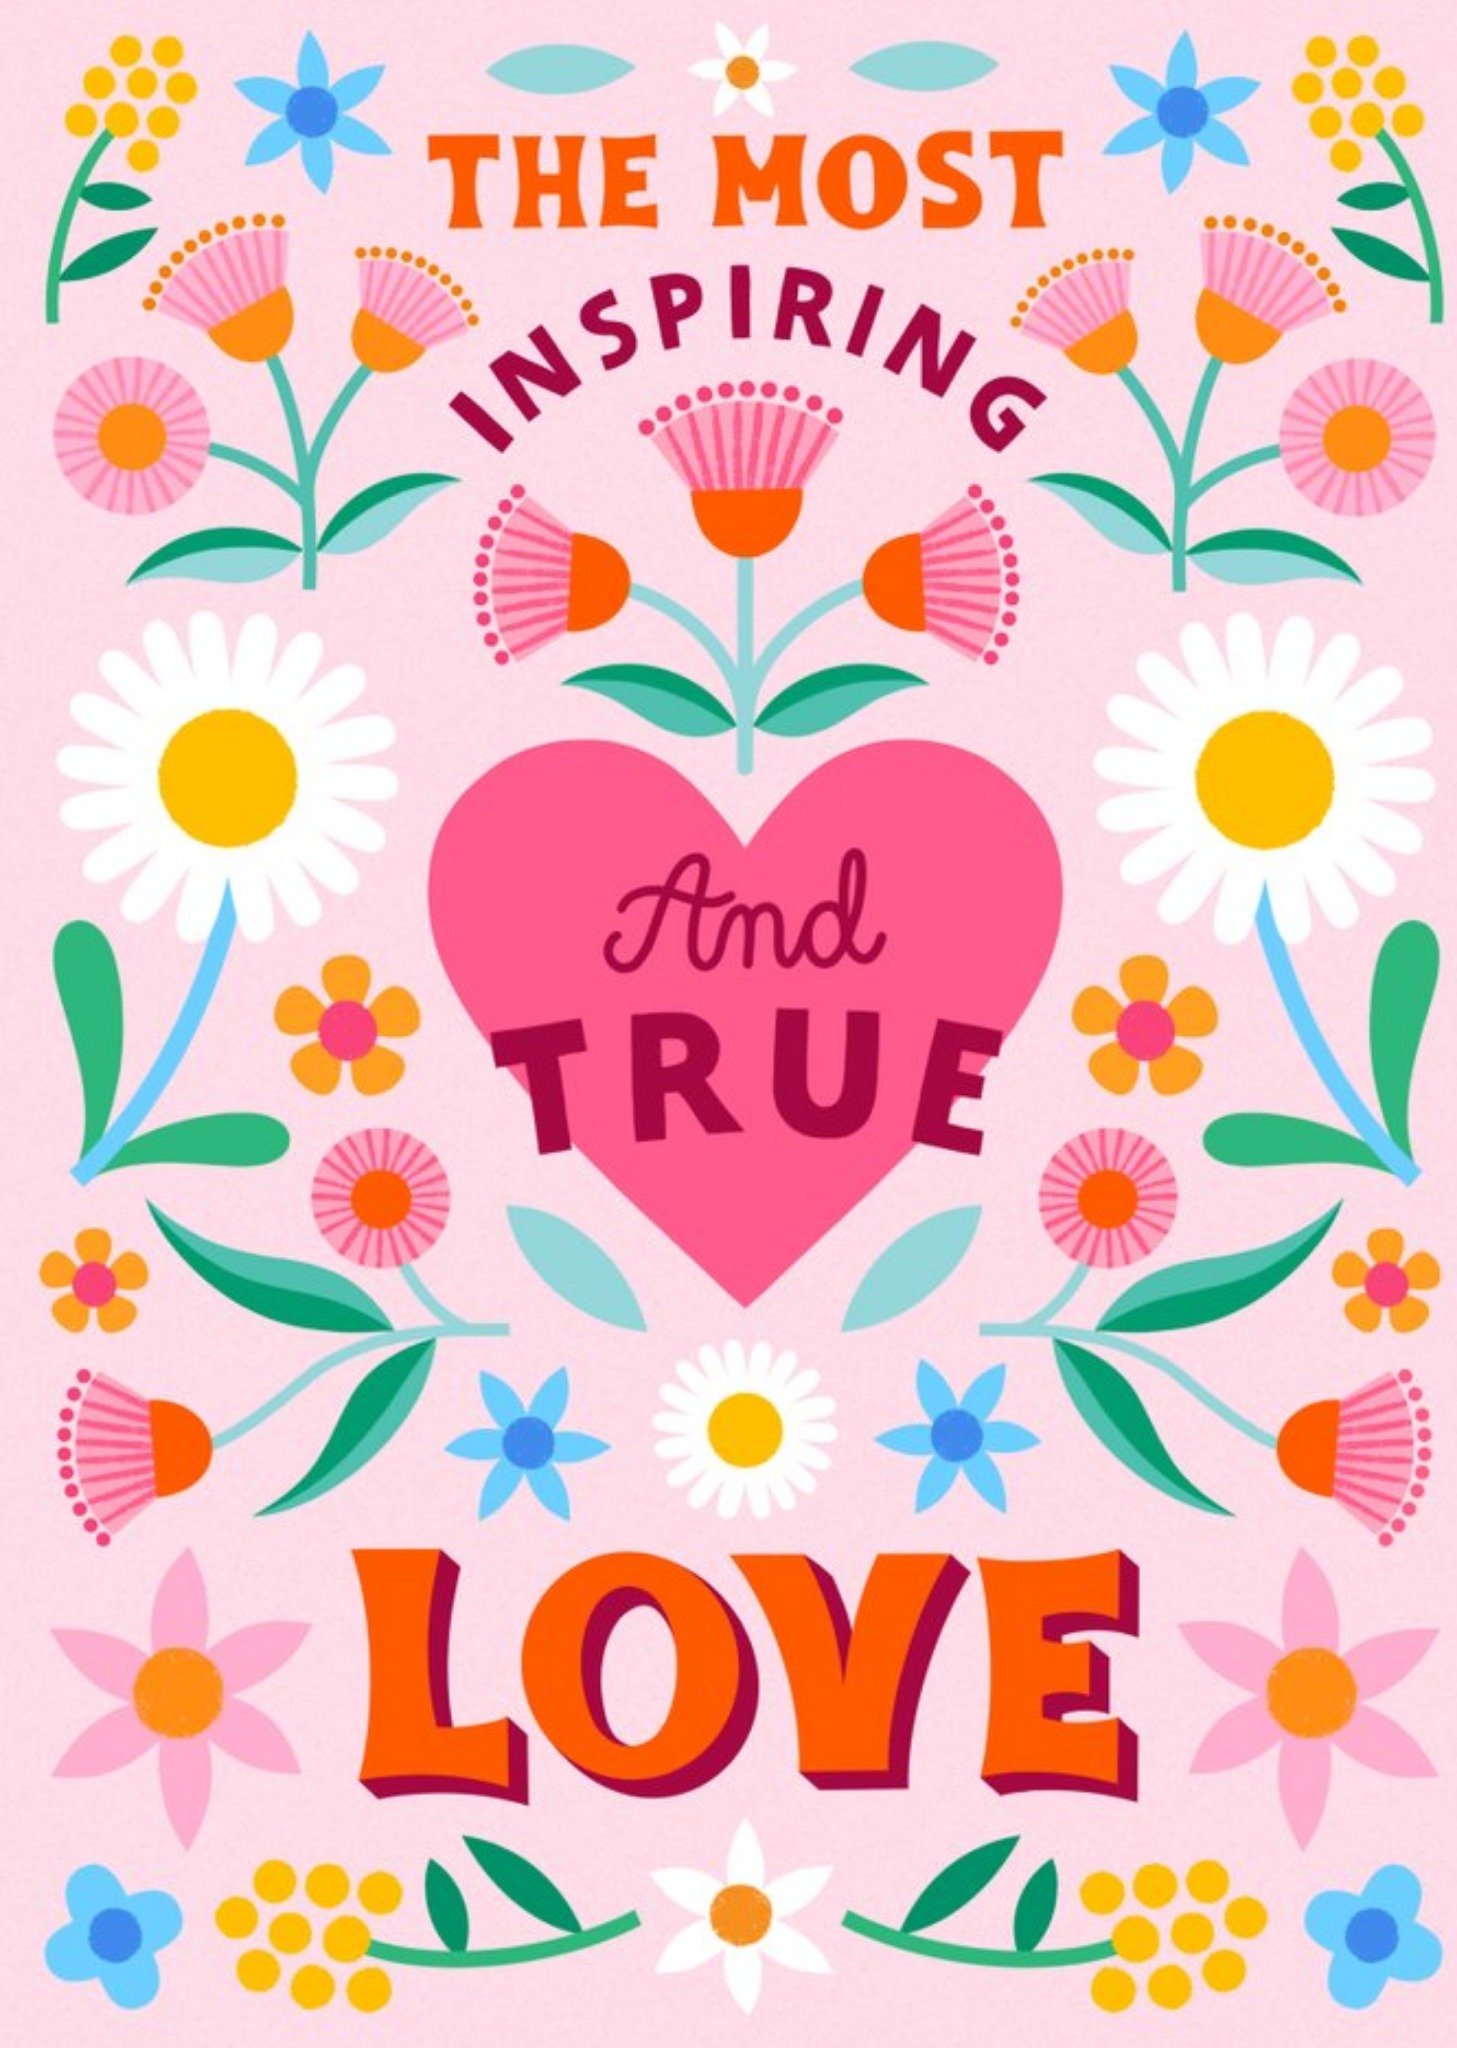 Moonpig Inspiring And True Love Fun Modern Floral Greetings Card For Weddings Anniversaries And Vale